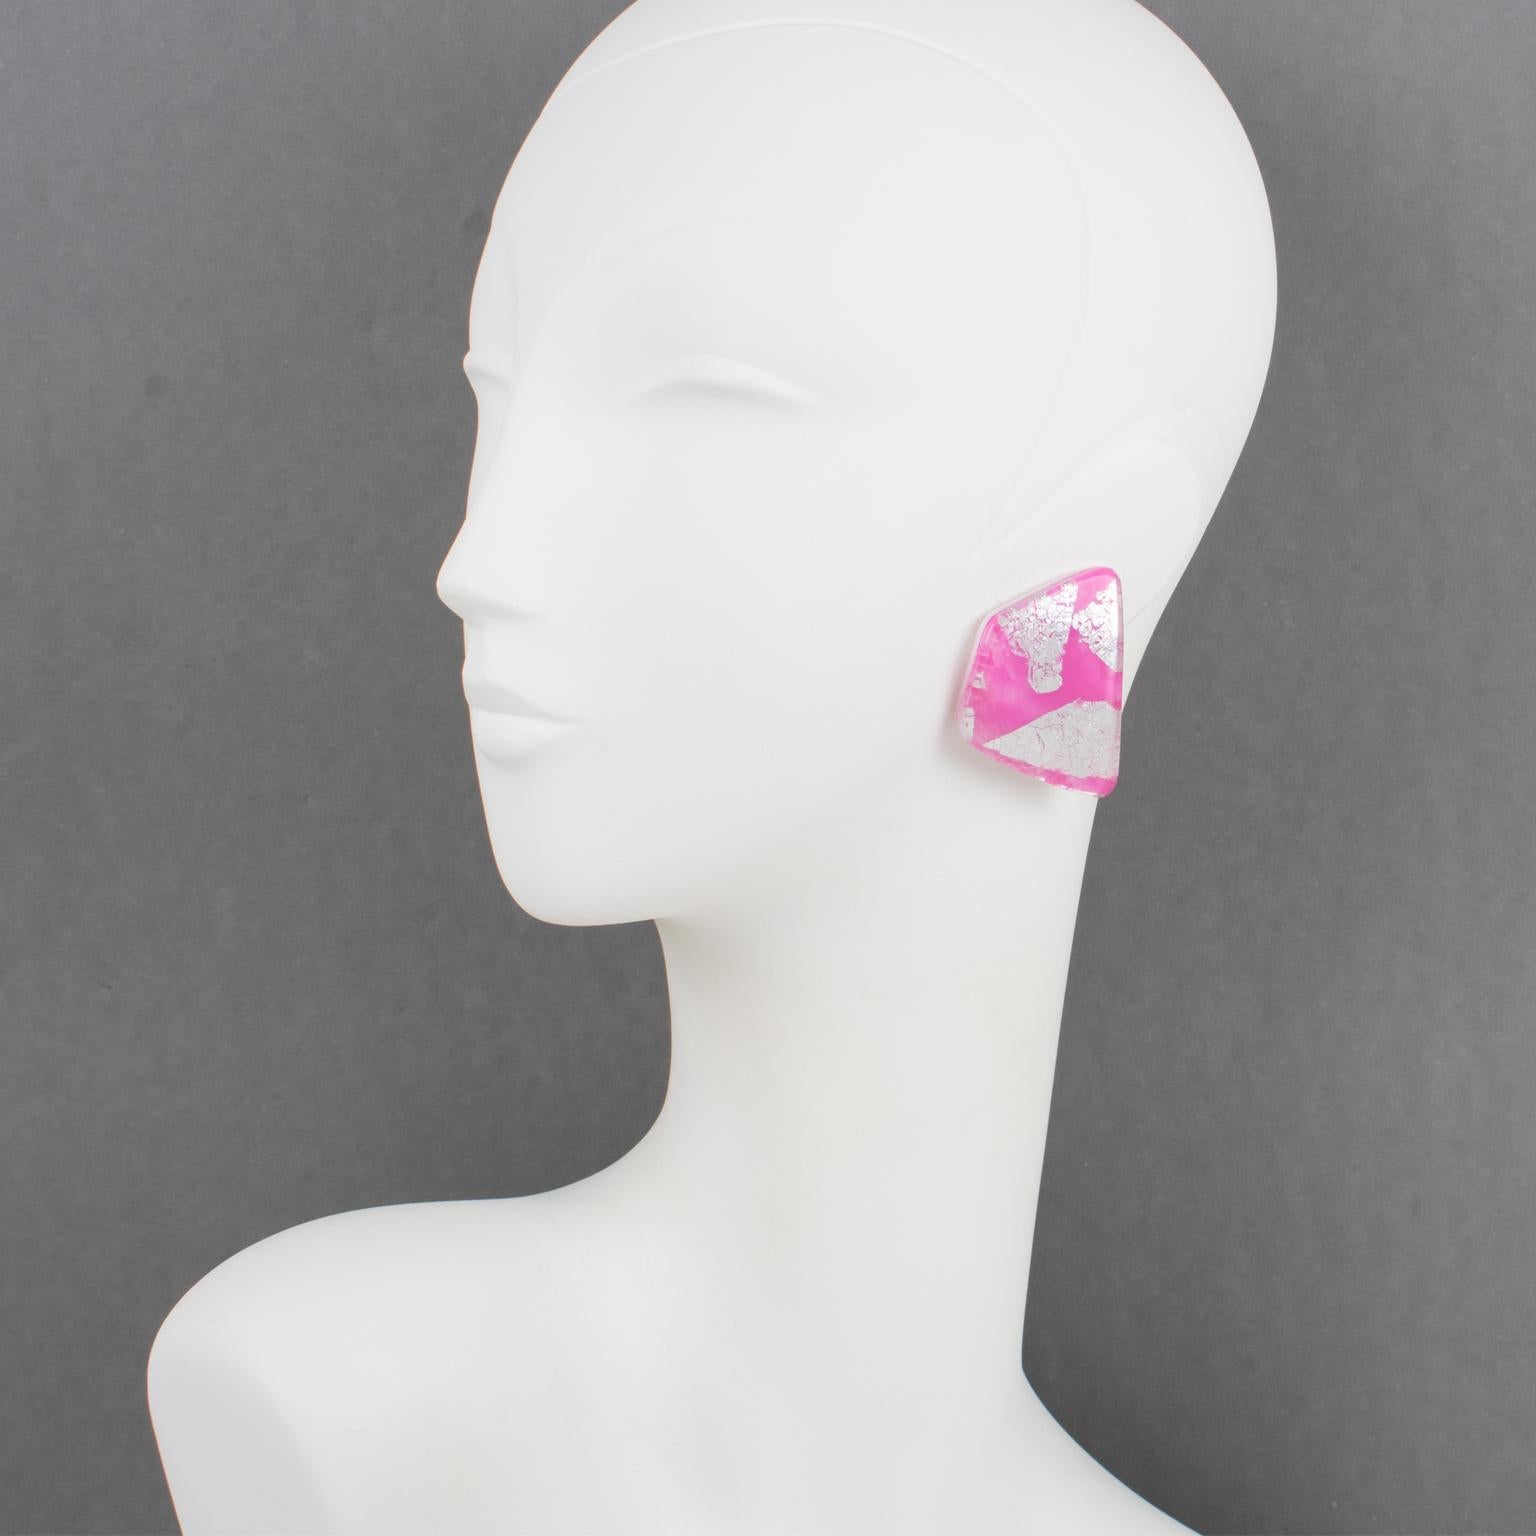 These stunning Anne and Frank Vigneri Lucite clip-on earrings feature a dimensional curved geometric design. The earrings are built with multilayer Lucite, white background topped with bubblegum pink Lucite with embedded silver foil inclusions.